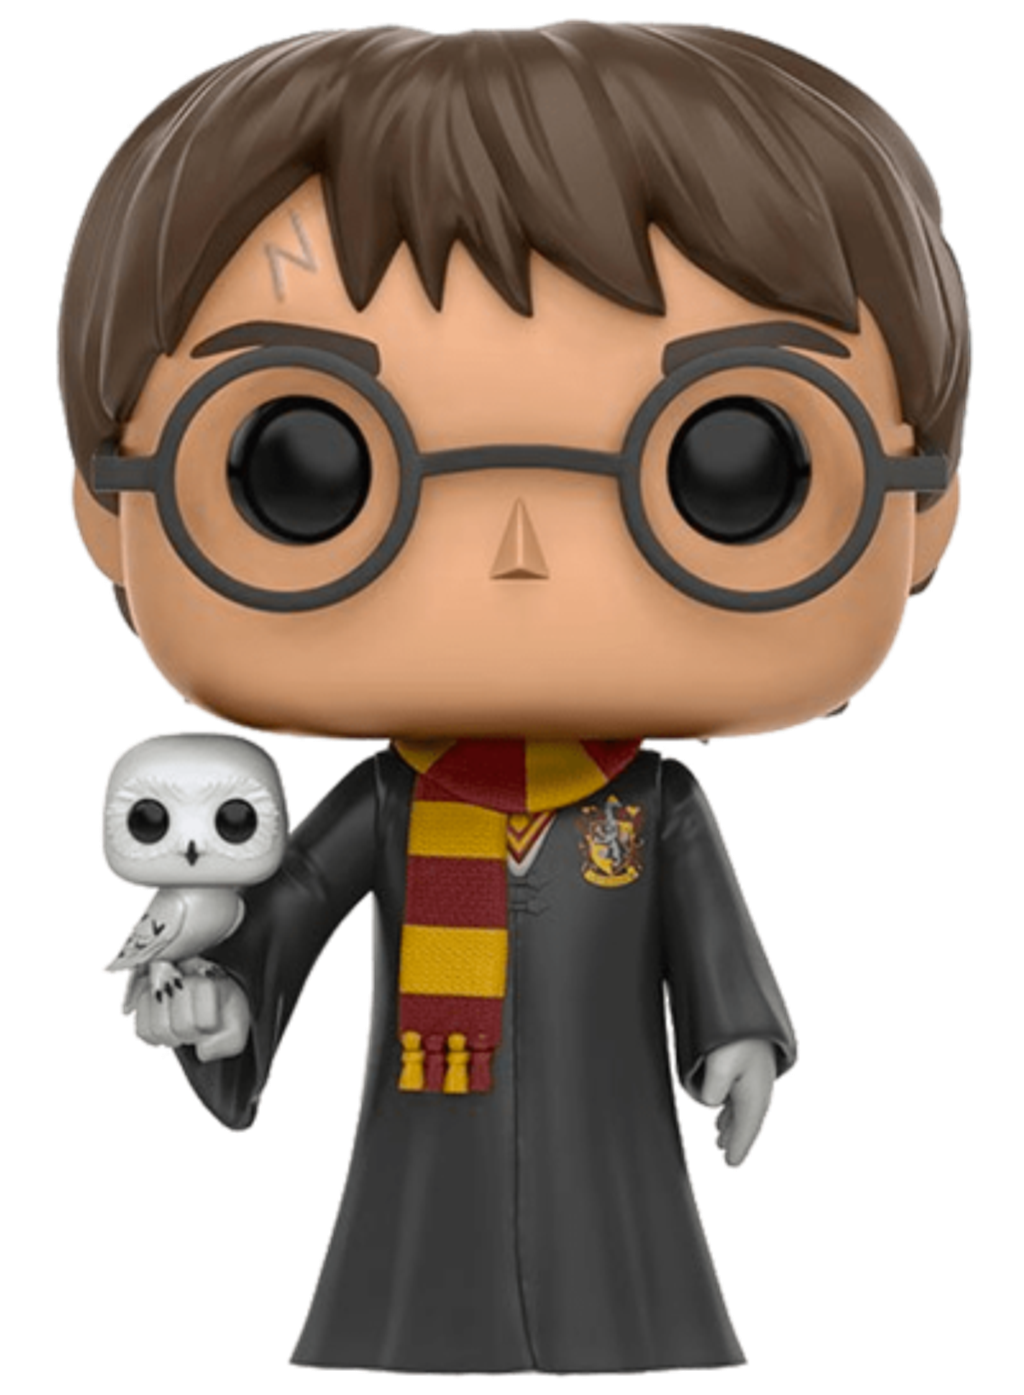 31-harry-potter-with-hedwig-pop-vinyl-400x0-c-center.png